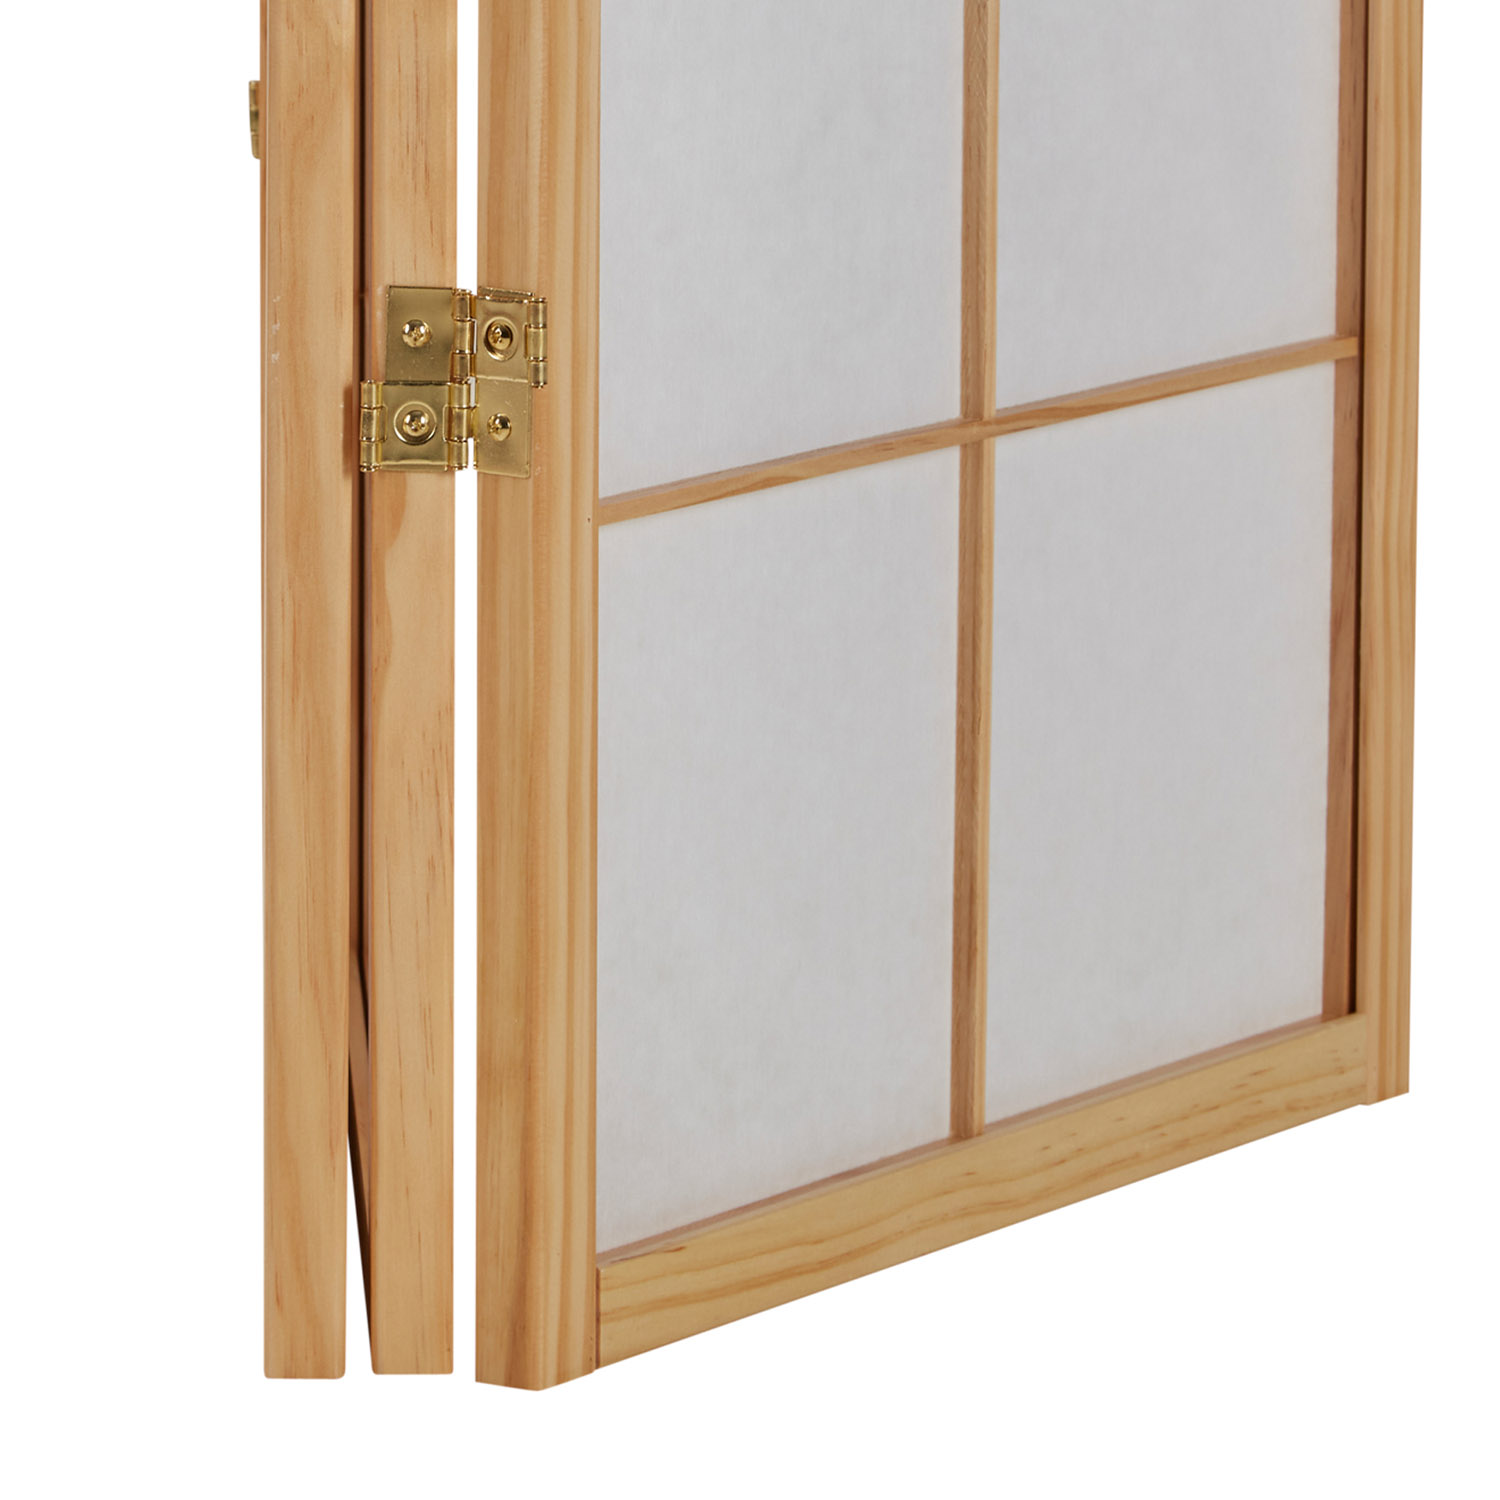 Paravent room divider 6 pieces, wood natural, rice paper white, bamboo pattern, height 179 cm	